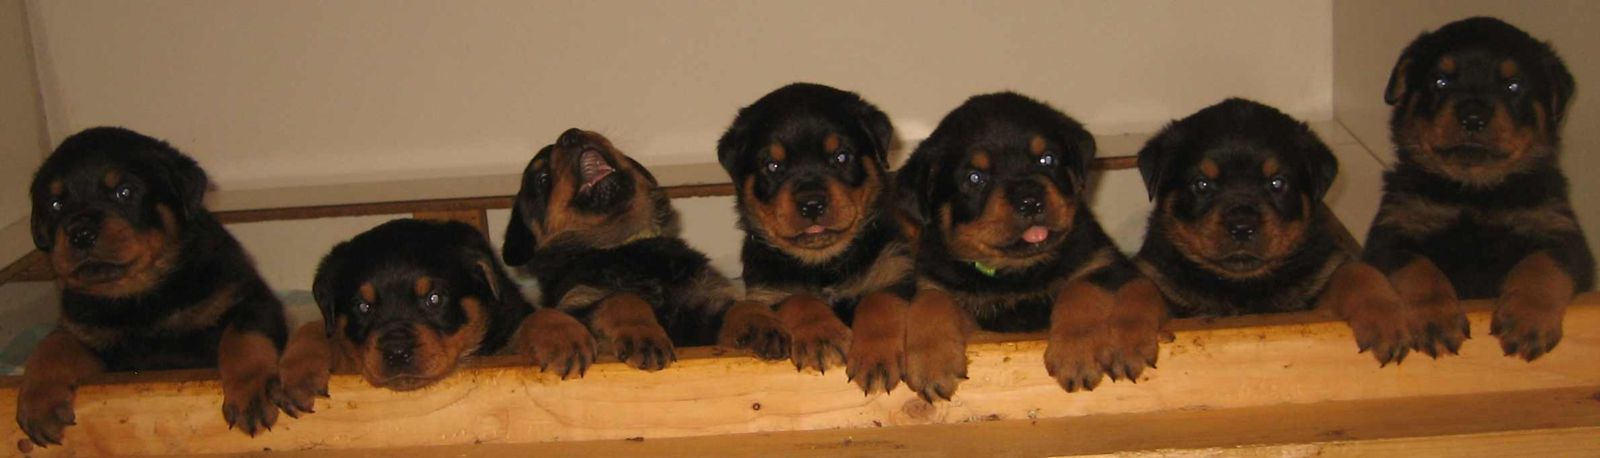 rottweiler puppies for sale in metro detroit area